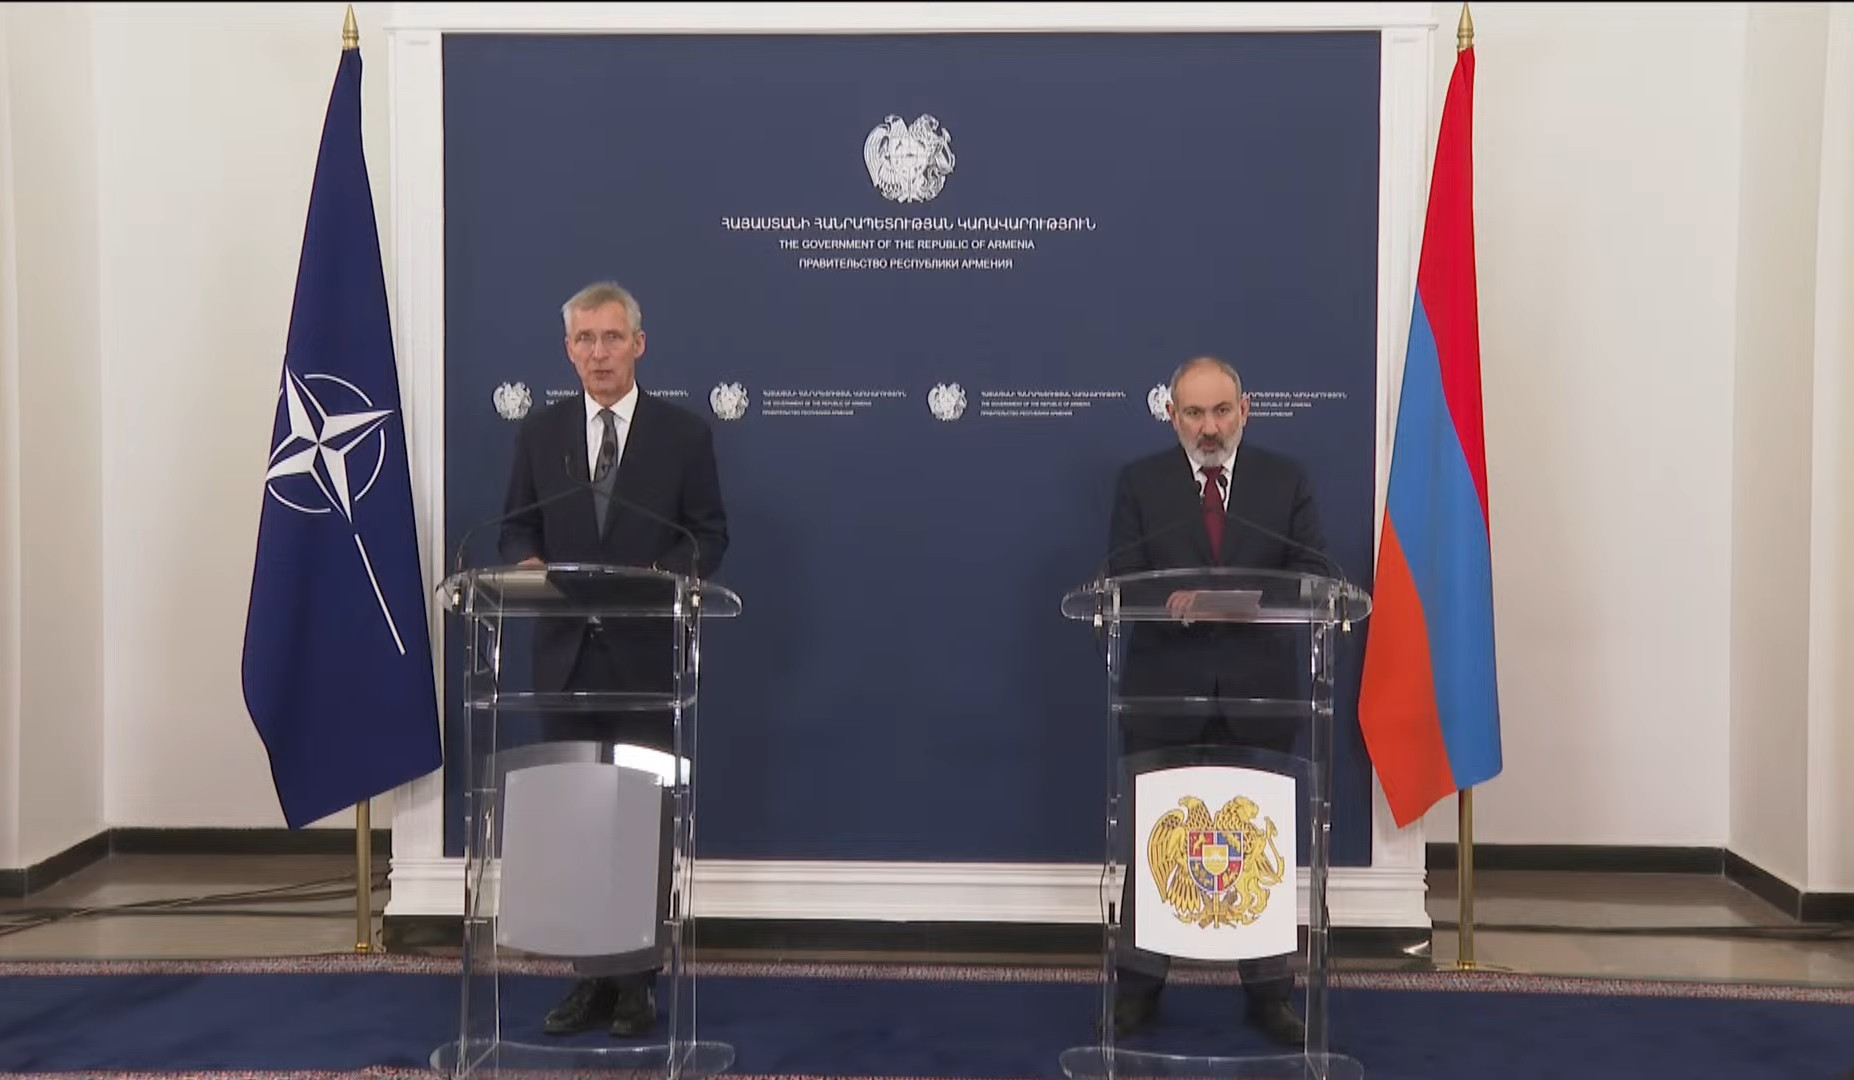 I appreciate your personal leadership, the fact that you speak clearly in favor of peace, Stoltenberg tells Pashinyan